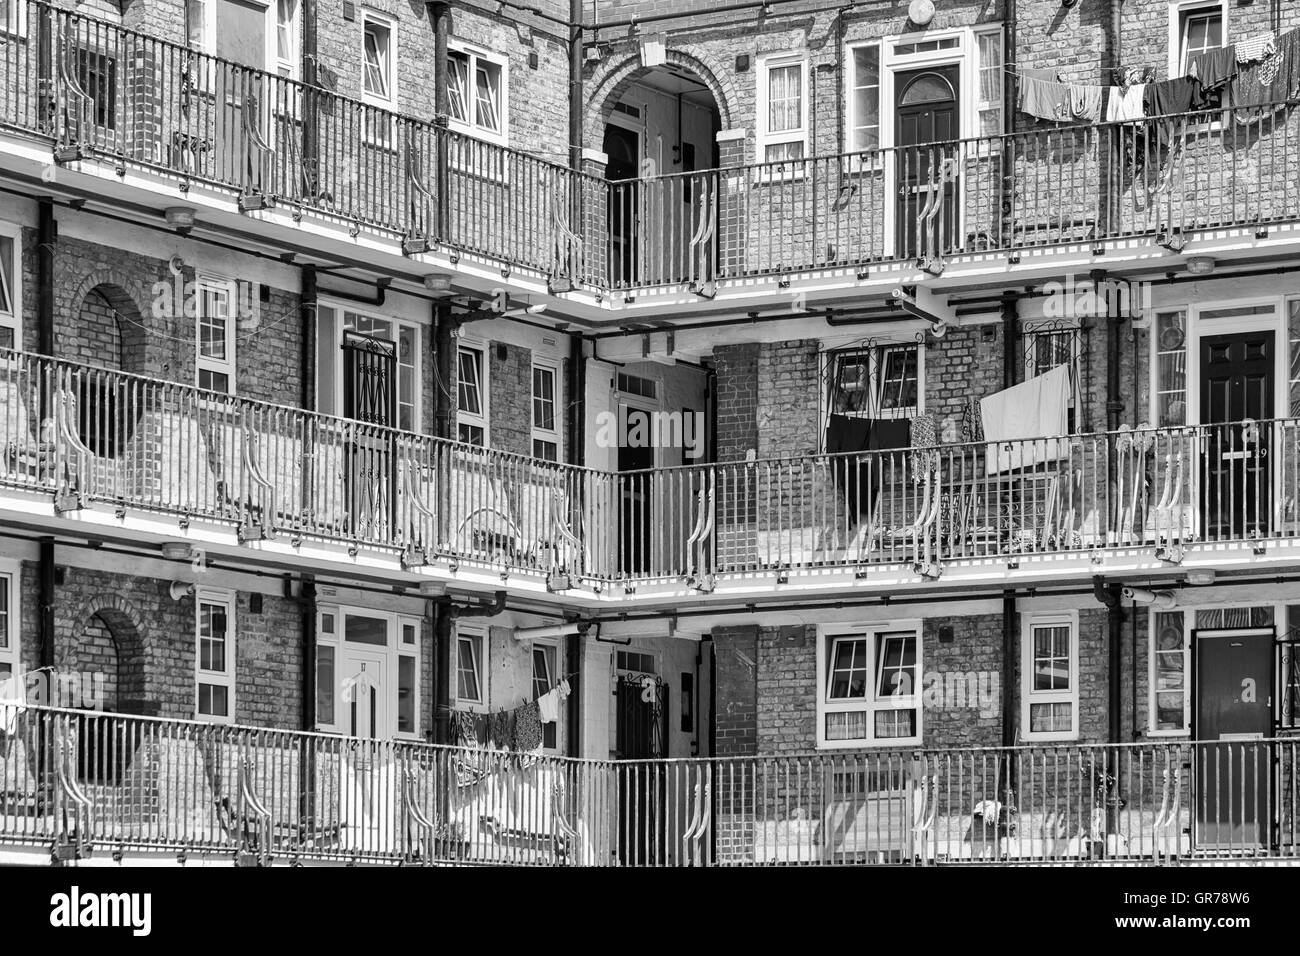 Flats, apartments, social housing, council housing in Bethnal Green area, London UK in July - monochrome black and white black & white B&W Stock Photo